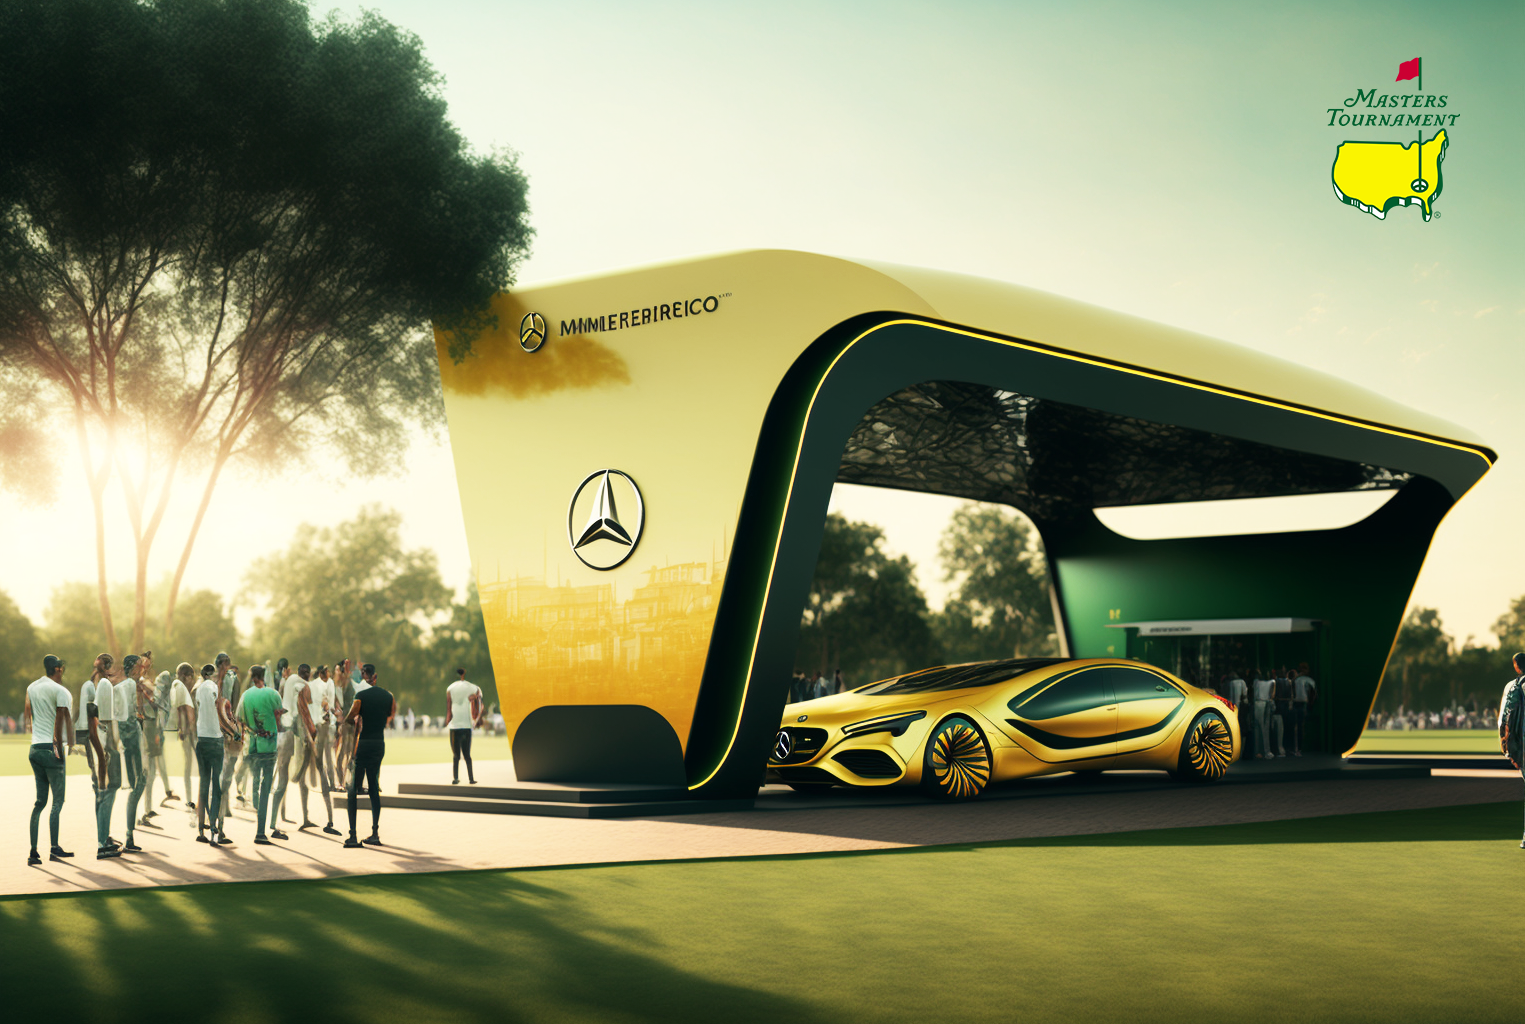 3_Adrian_Curiel_Mercedes-Benz_showcase_at_The_Masters_Tournament_7.png